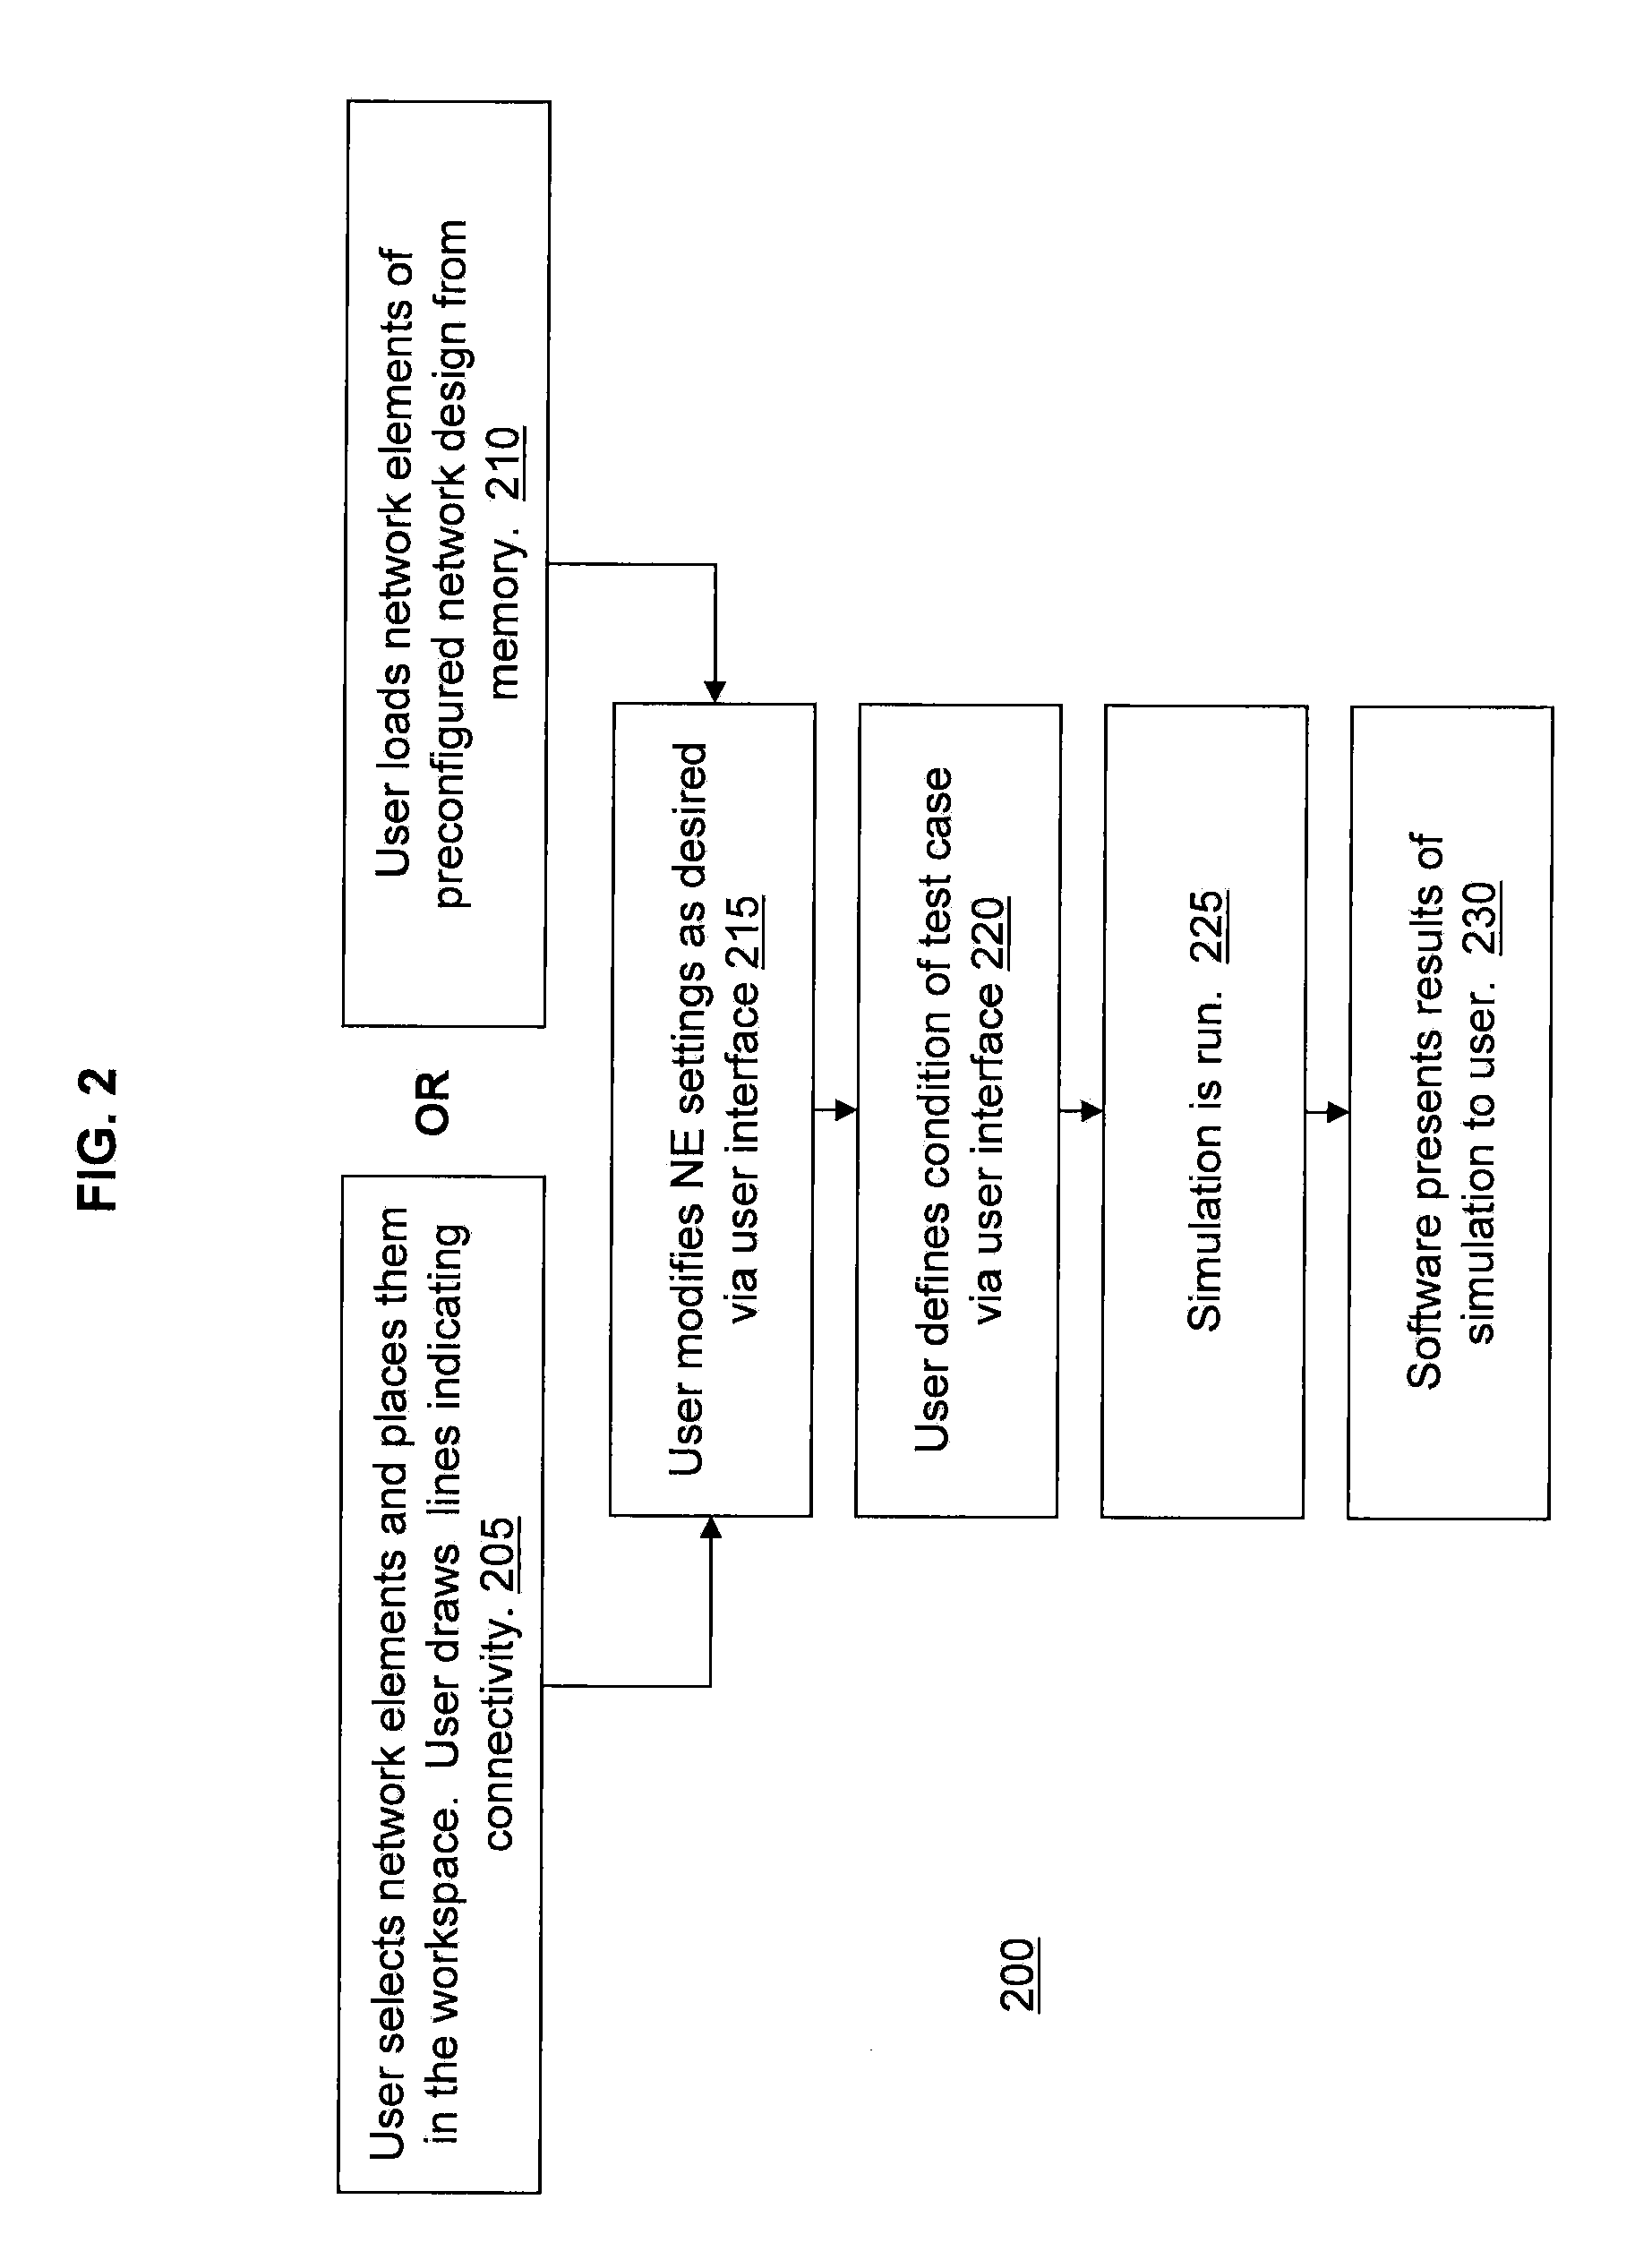 Method, Apparatus, and Computer Program Product for Traffic Simulation Tool for Networks